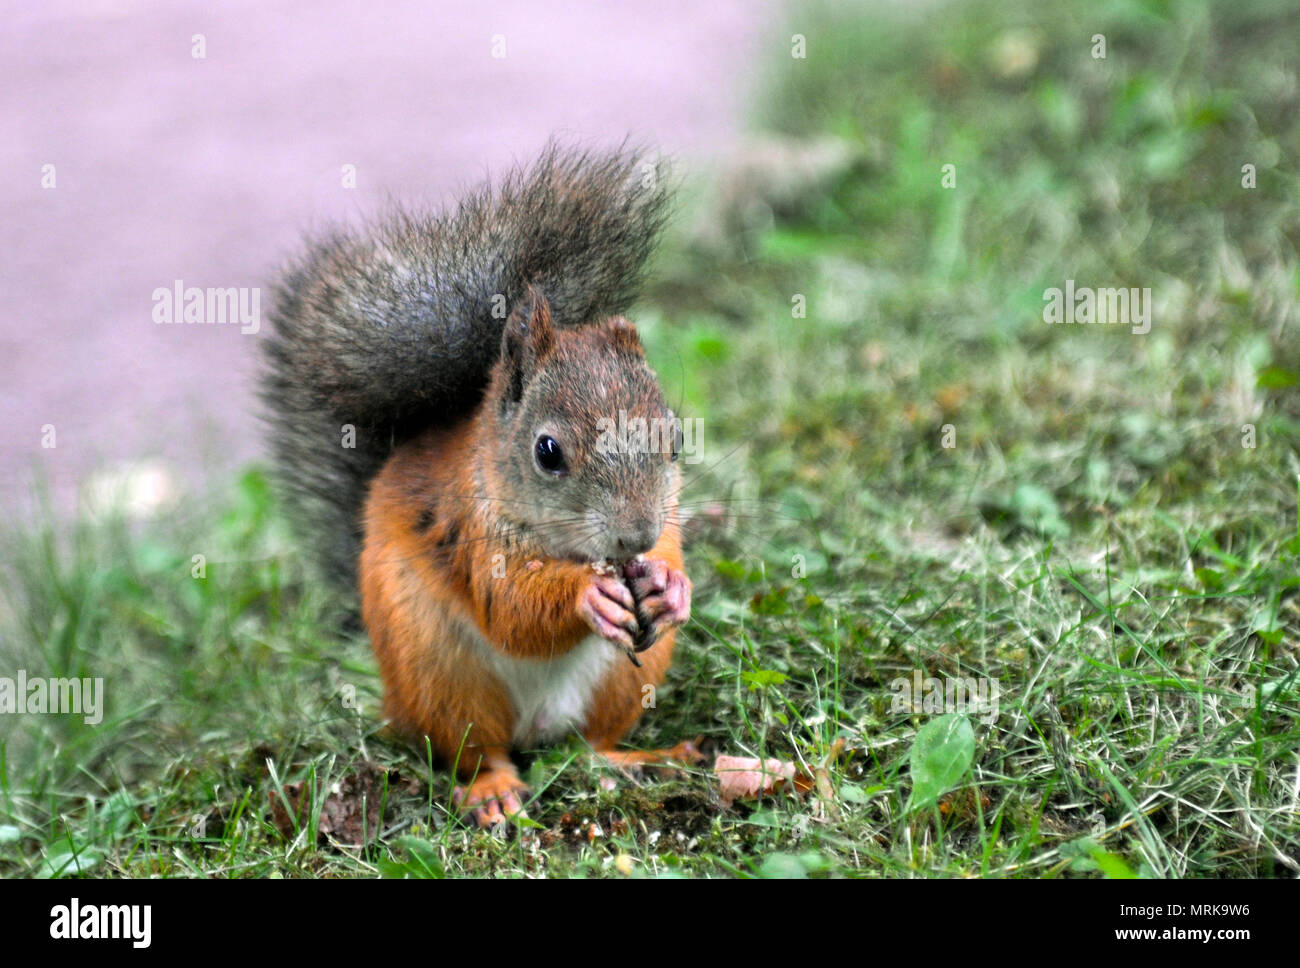 A red tree squirrel eating Stock Photo